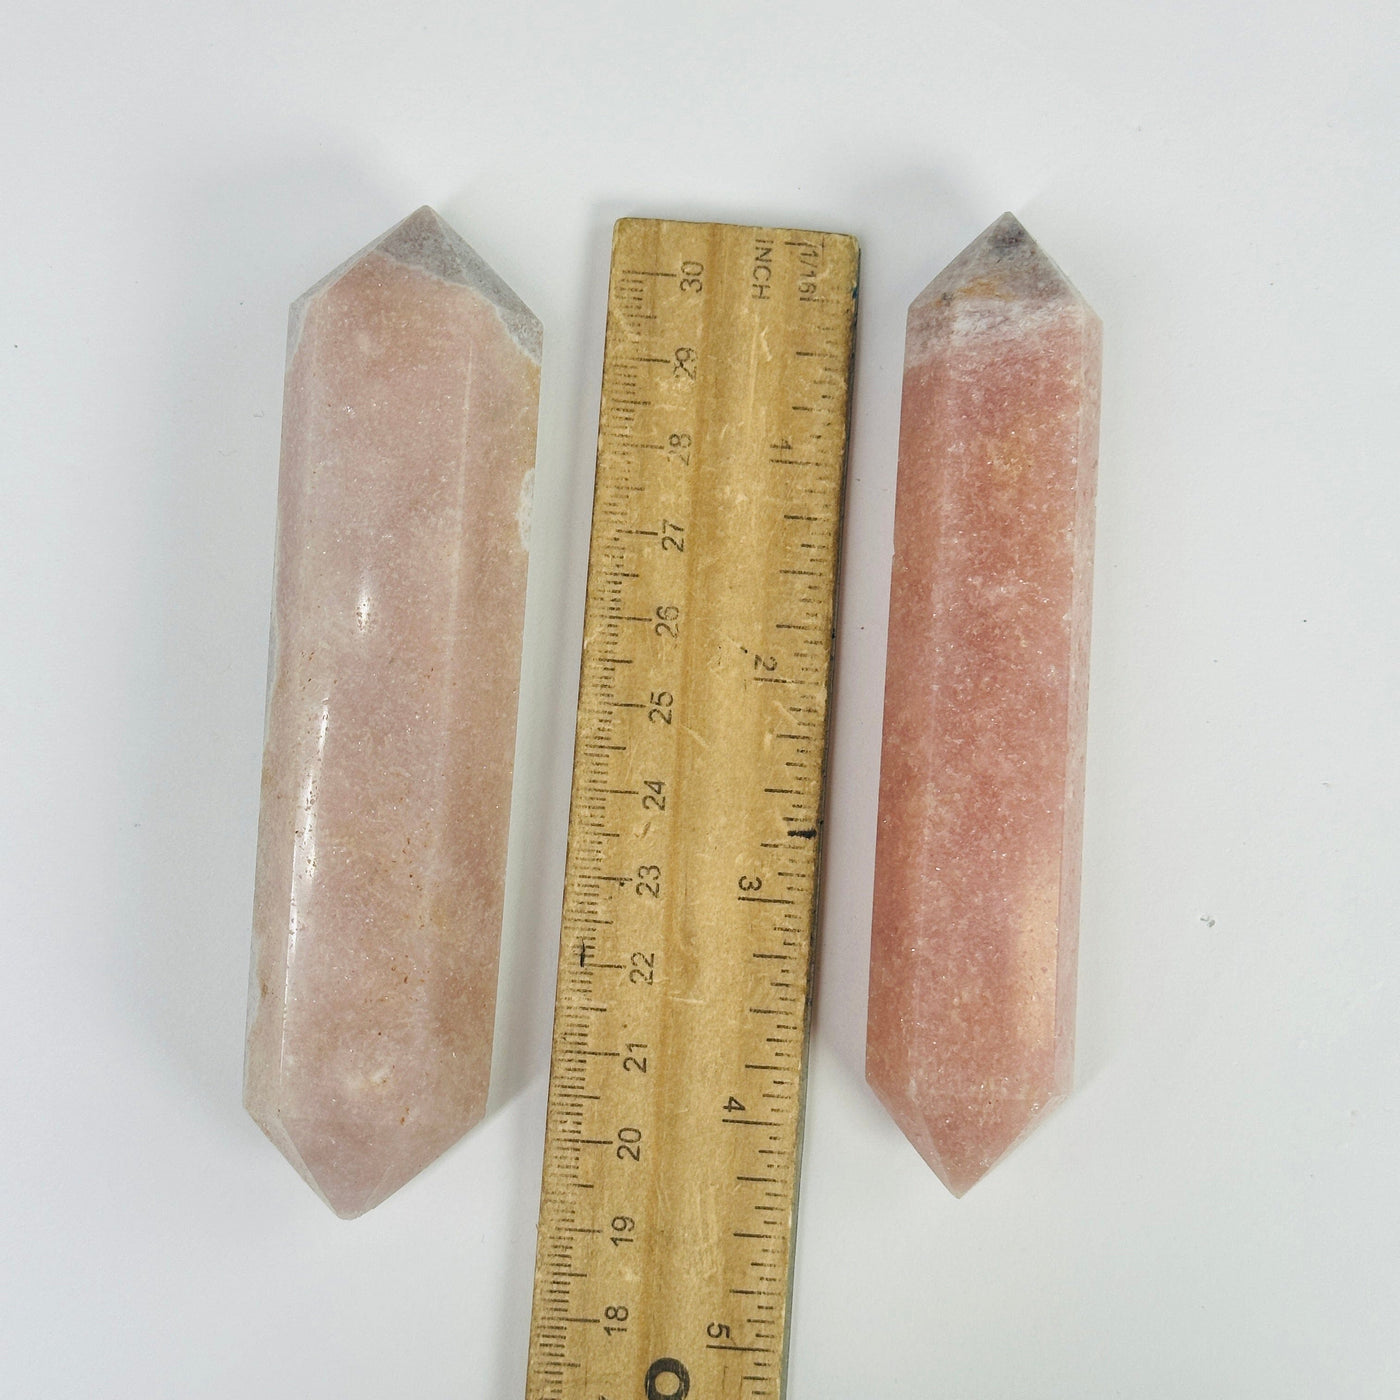 pink amethyst points next to a ruler for size reference